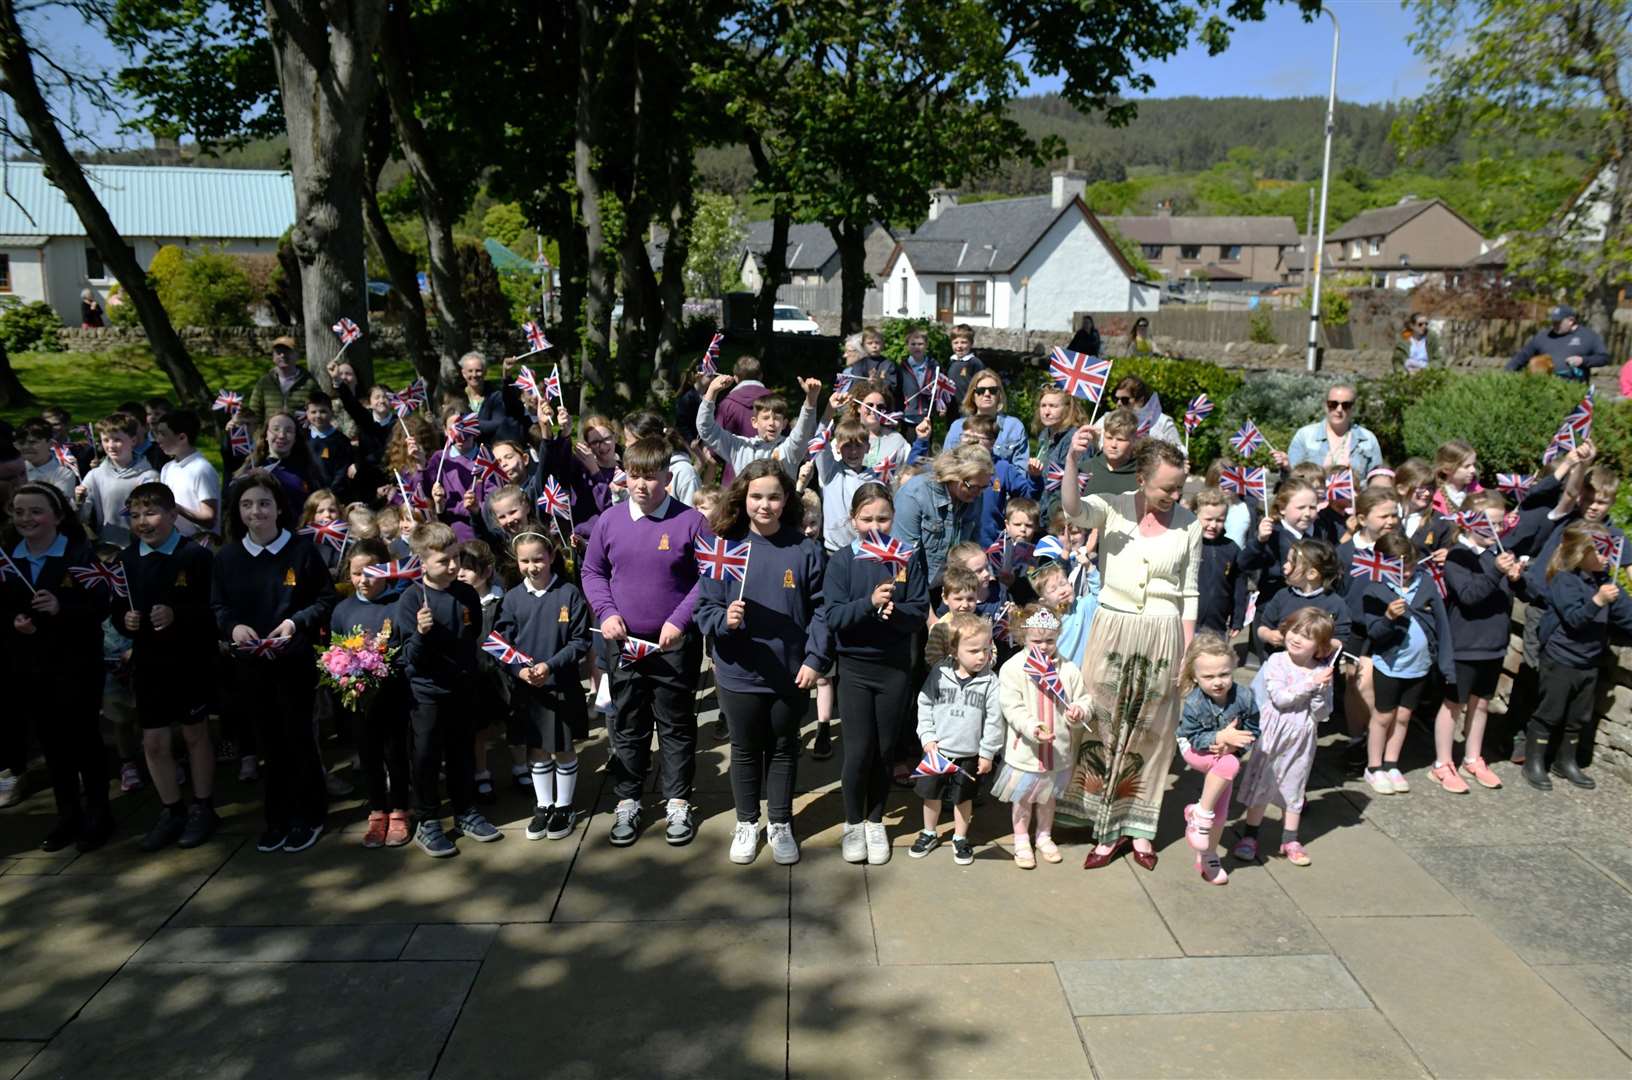 School children waved their Union Jack flags enthusiastically when the royal couple entered Golspie's Memorial Garden. Picture: James MacKenzie